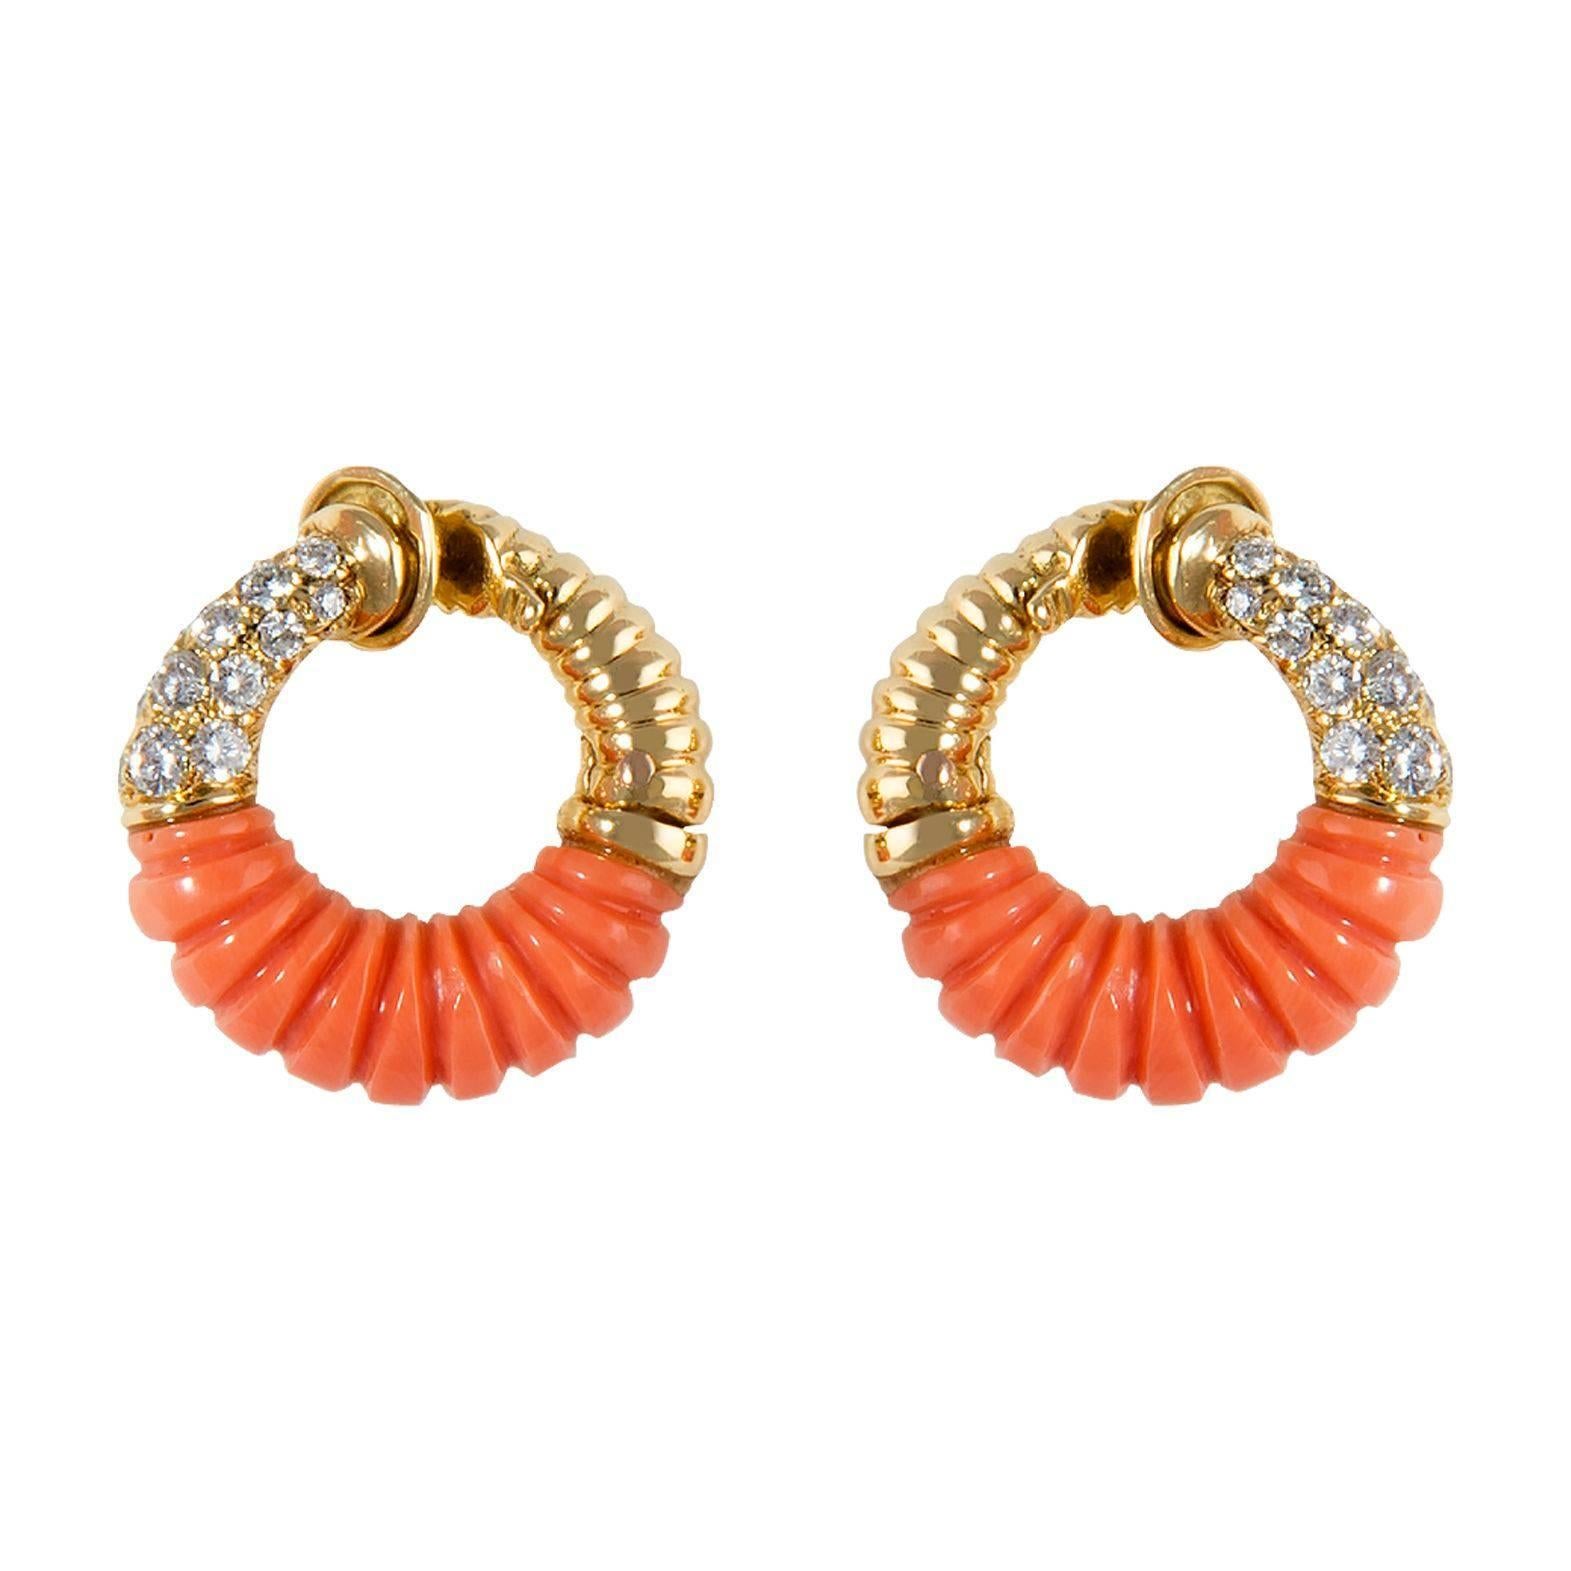 1970 Van Cleef & Arpels yellow gold earrings set with coral, diamonds, signed and numbered B3058K23, 2cm high (11.1 gms) 3520.